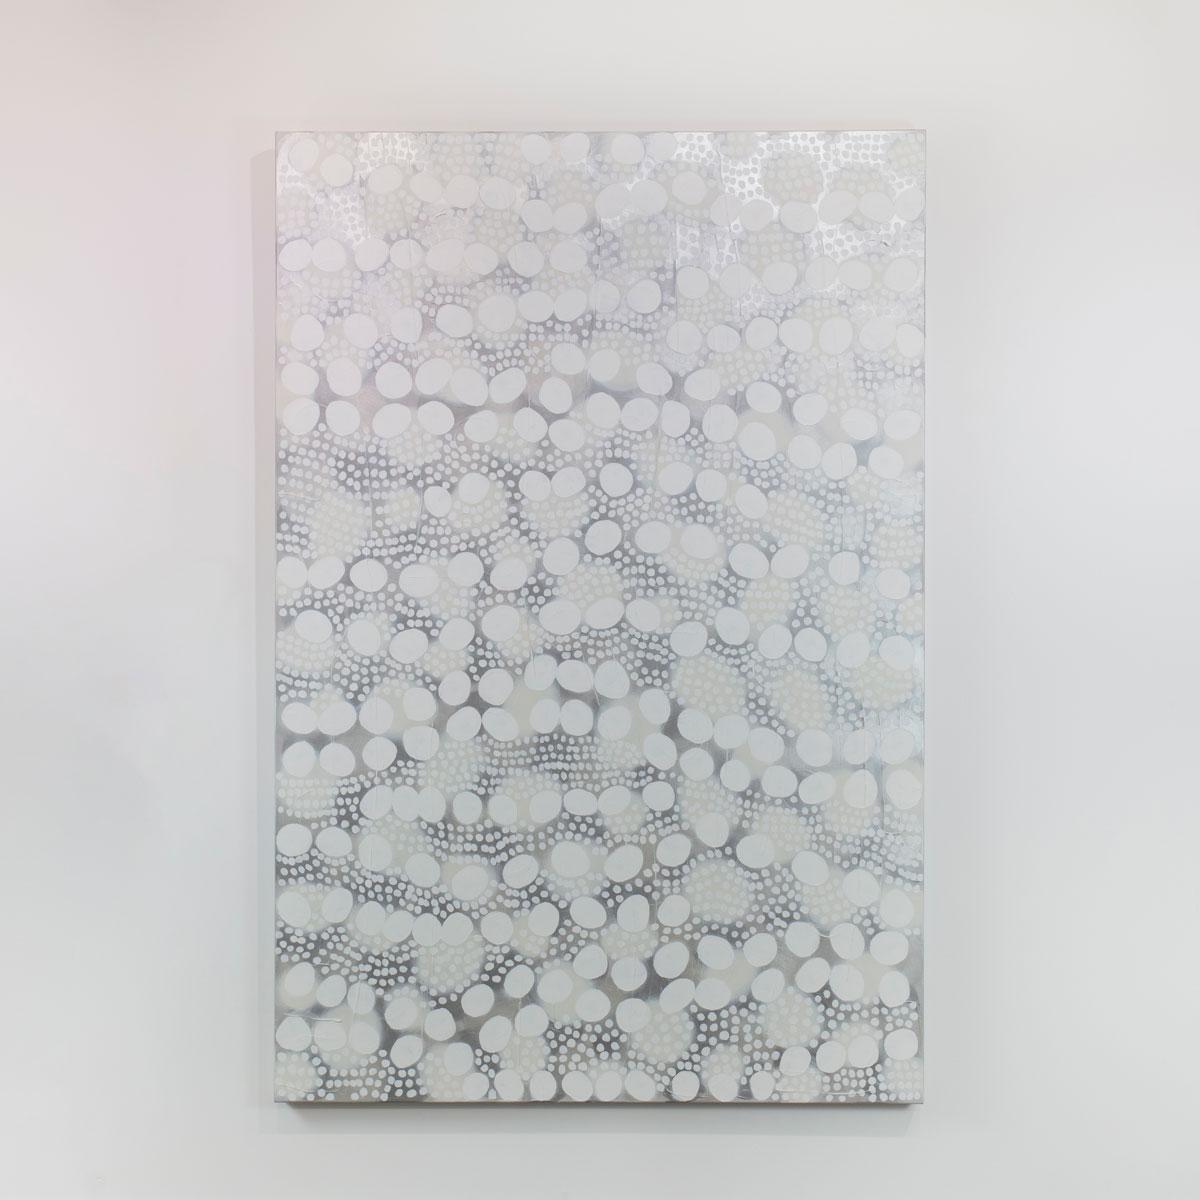 Abstract Painting Sofie Swann - Peinture abstraite blanche « A million Possibilities »